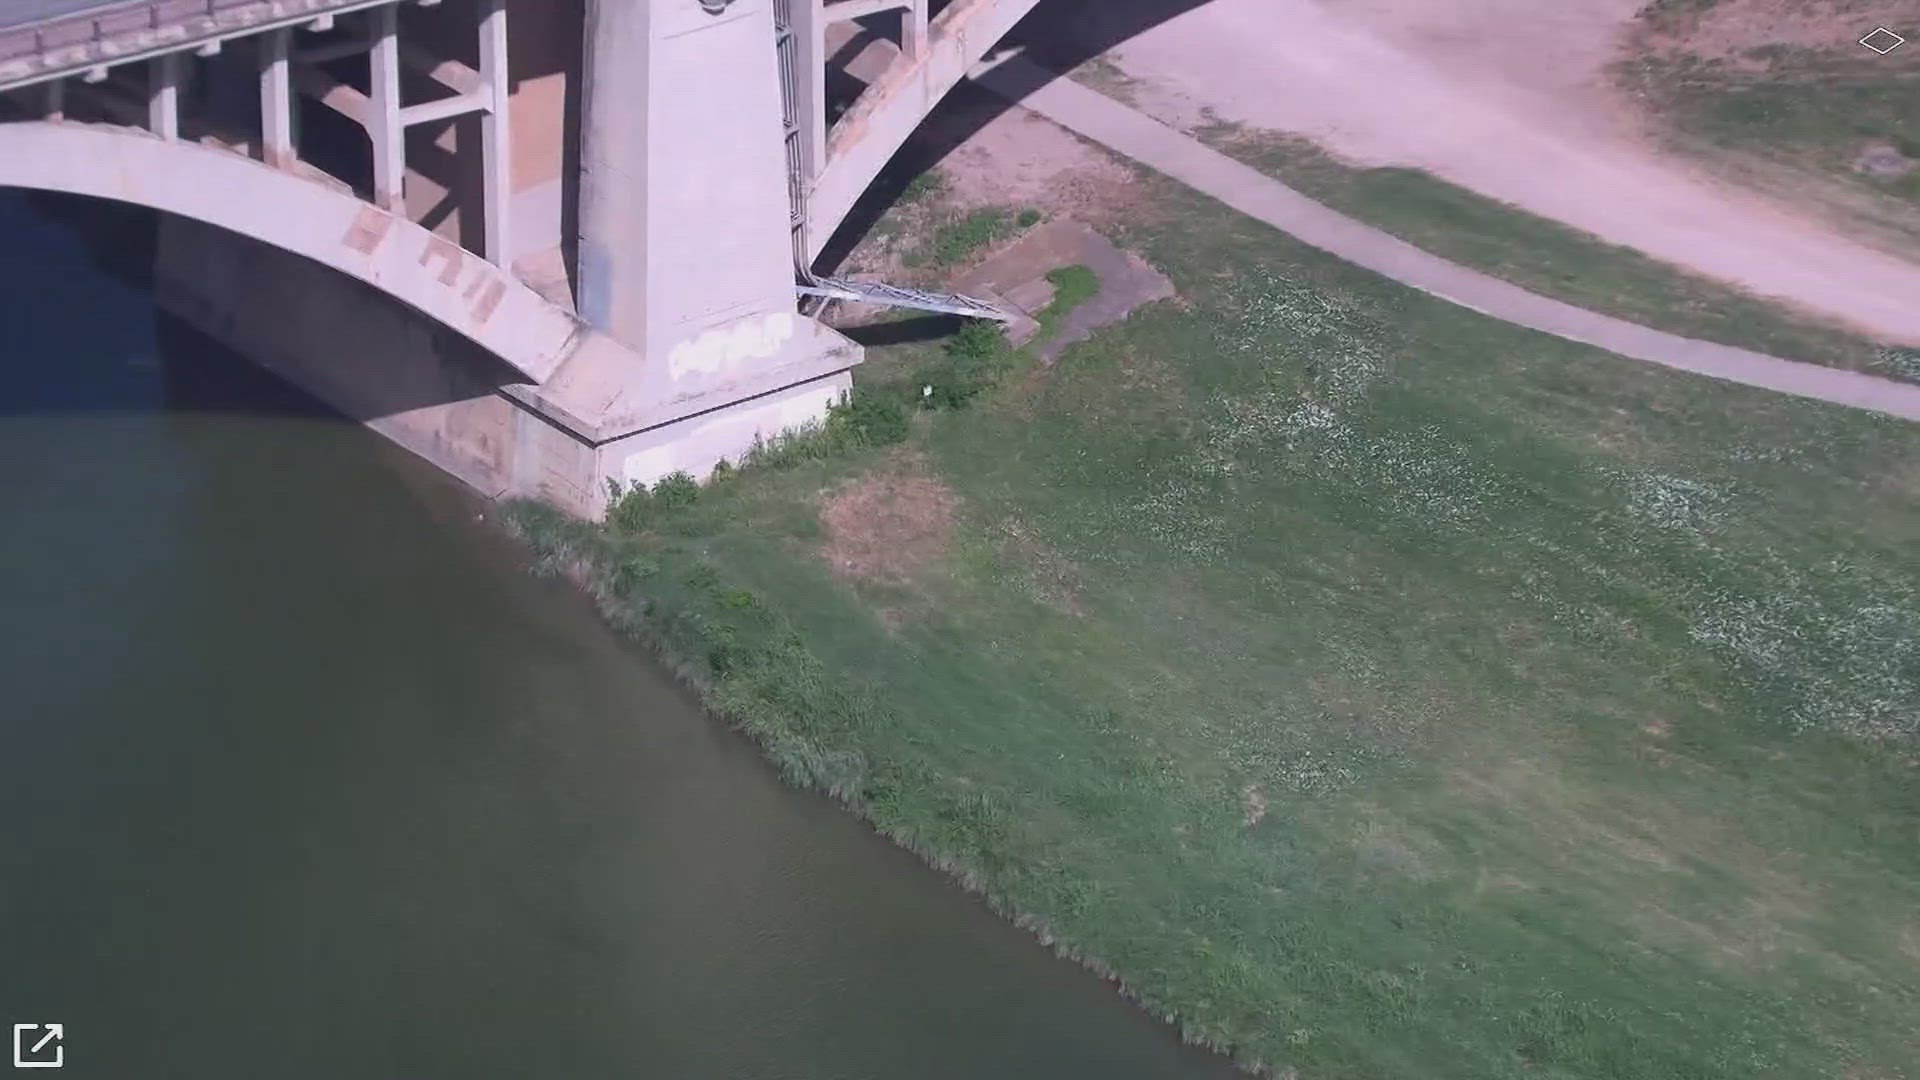 A white male was found floating in the Trinity River, police said in a statement.